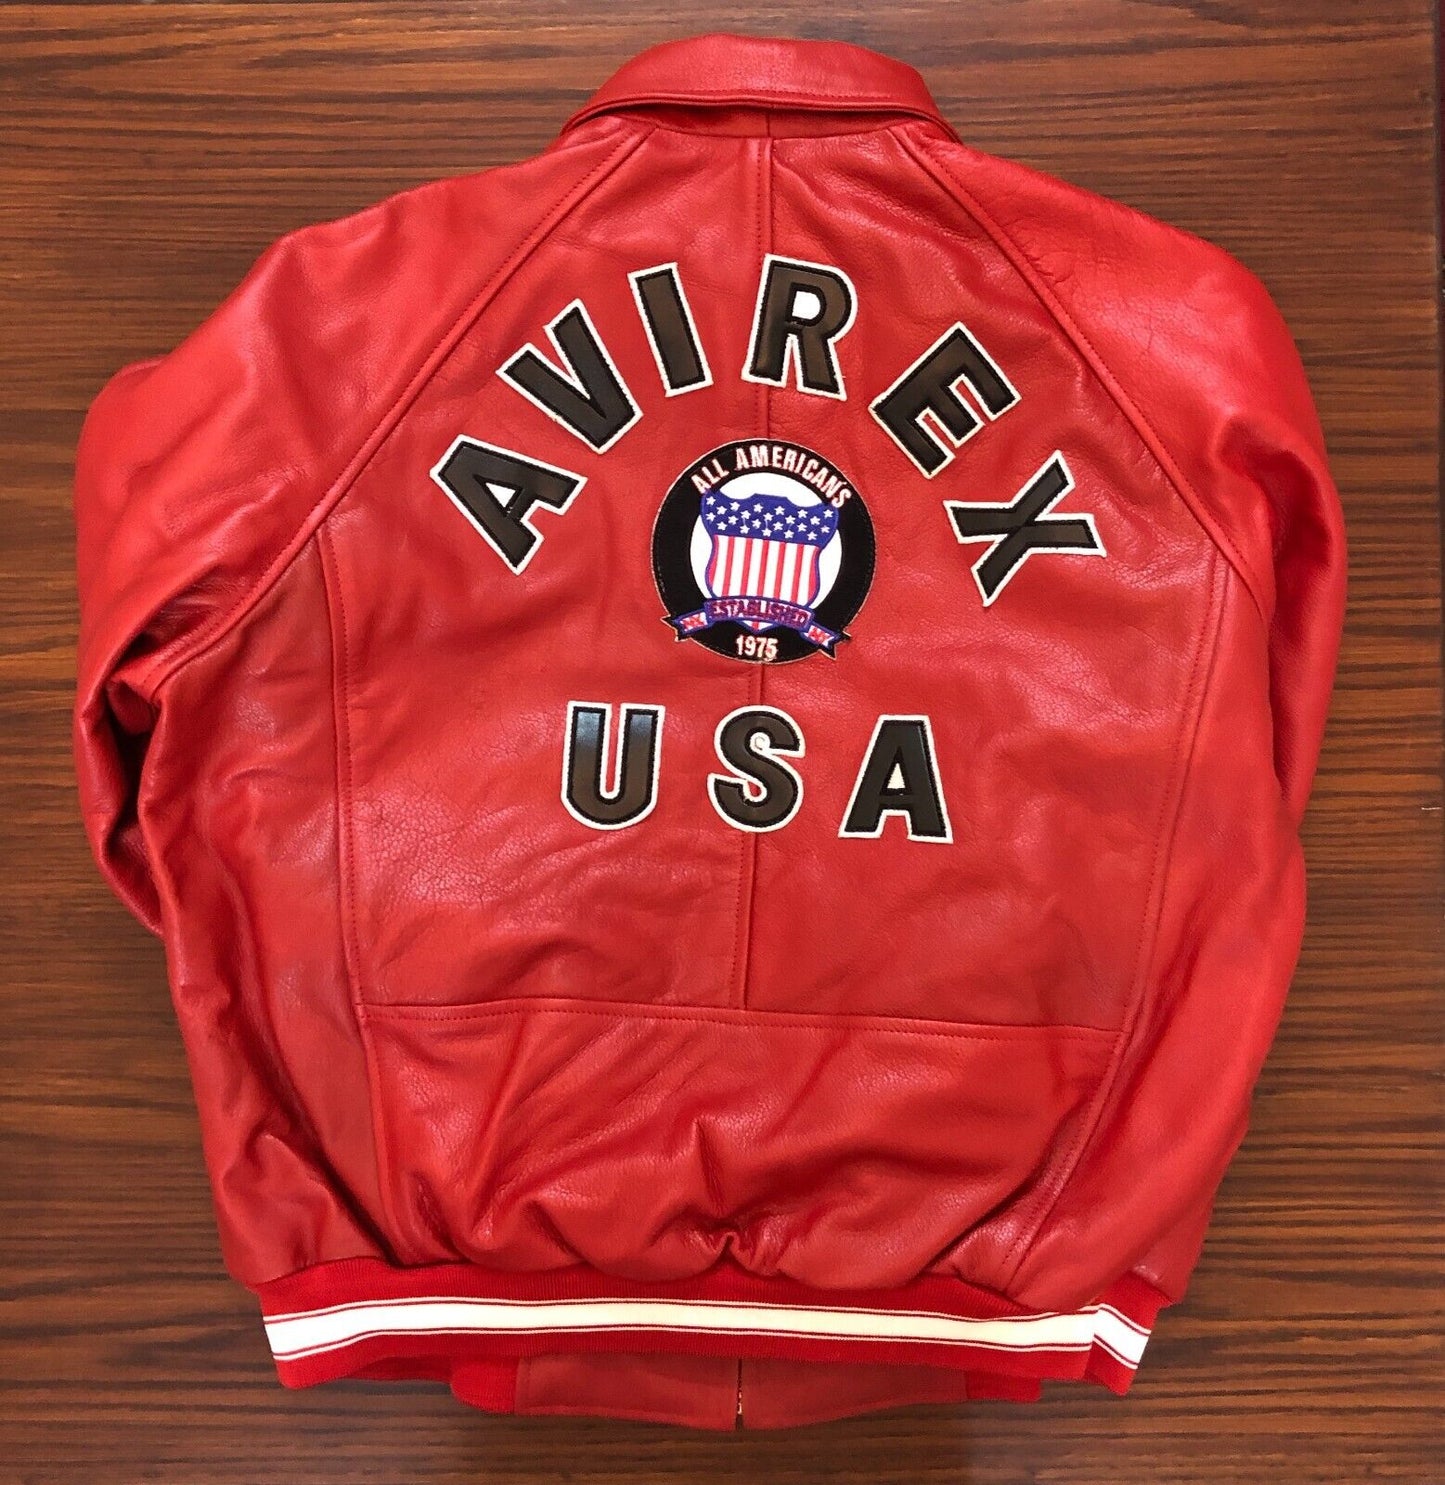 Premium Replica Red Flight Jacket: Men's Avirex-Inspired Leather Bomber - Button Stitched